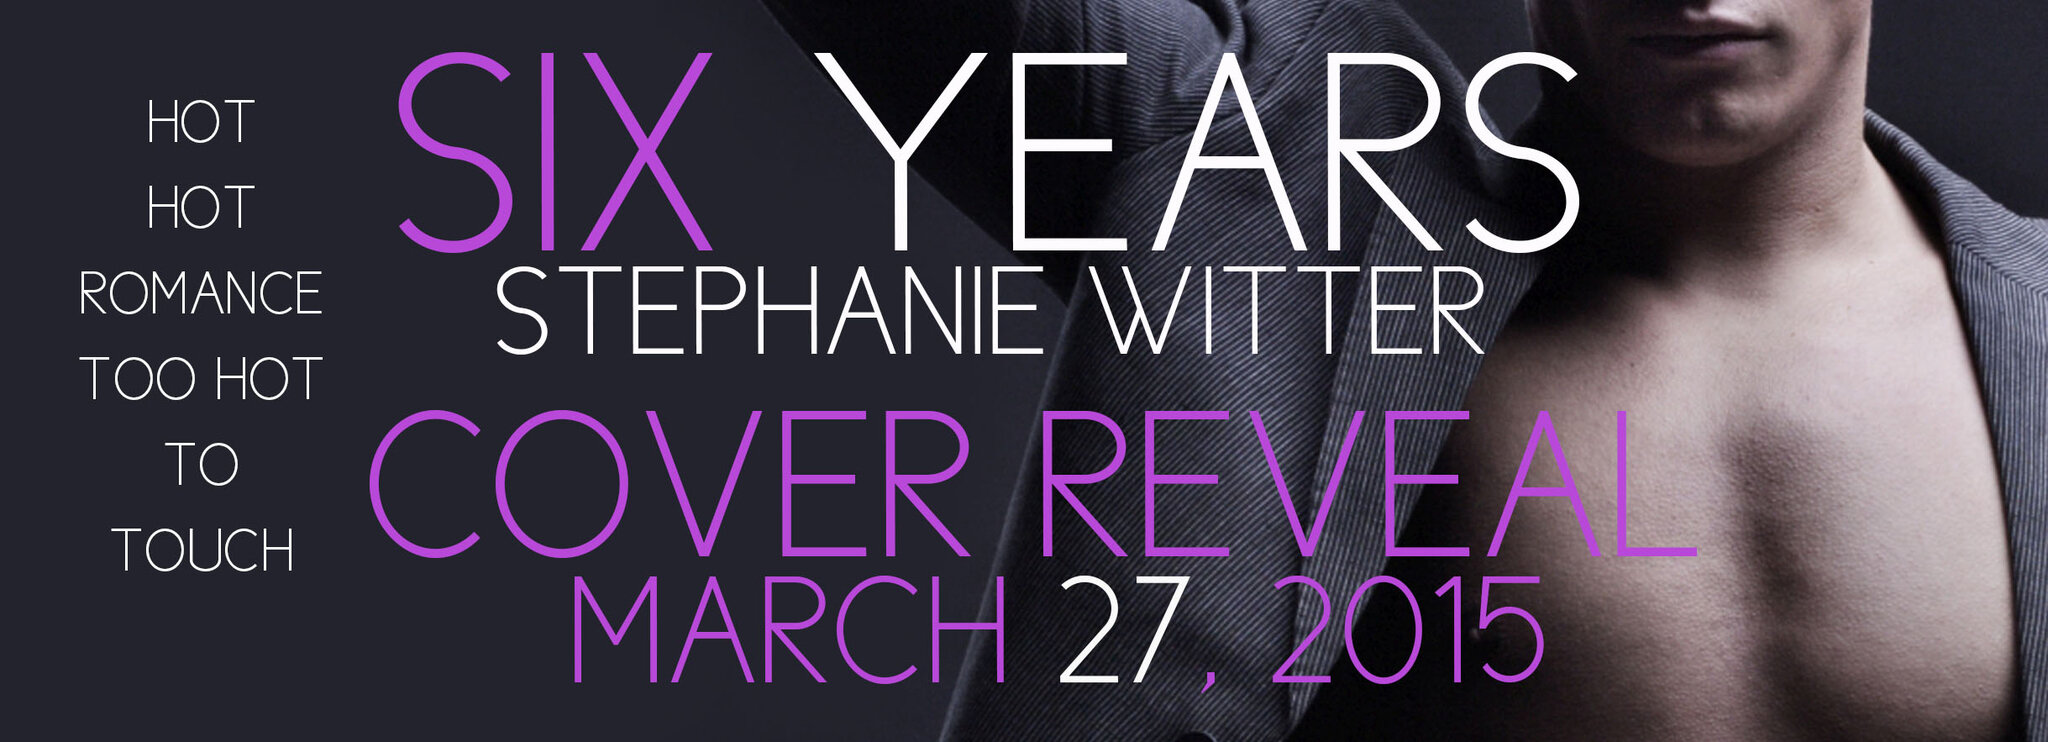 Stephanie___6years_Cover_Reveal